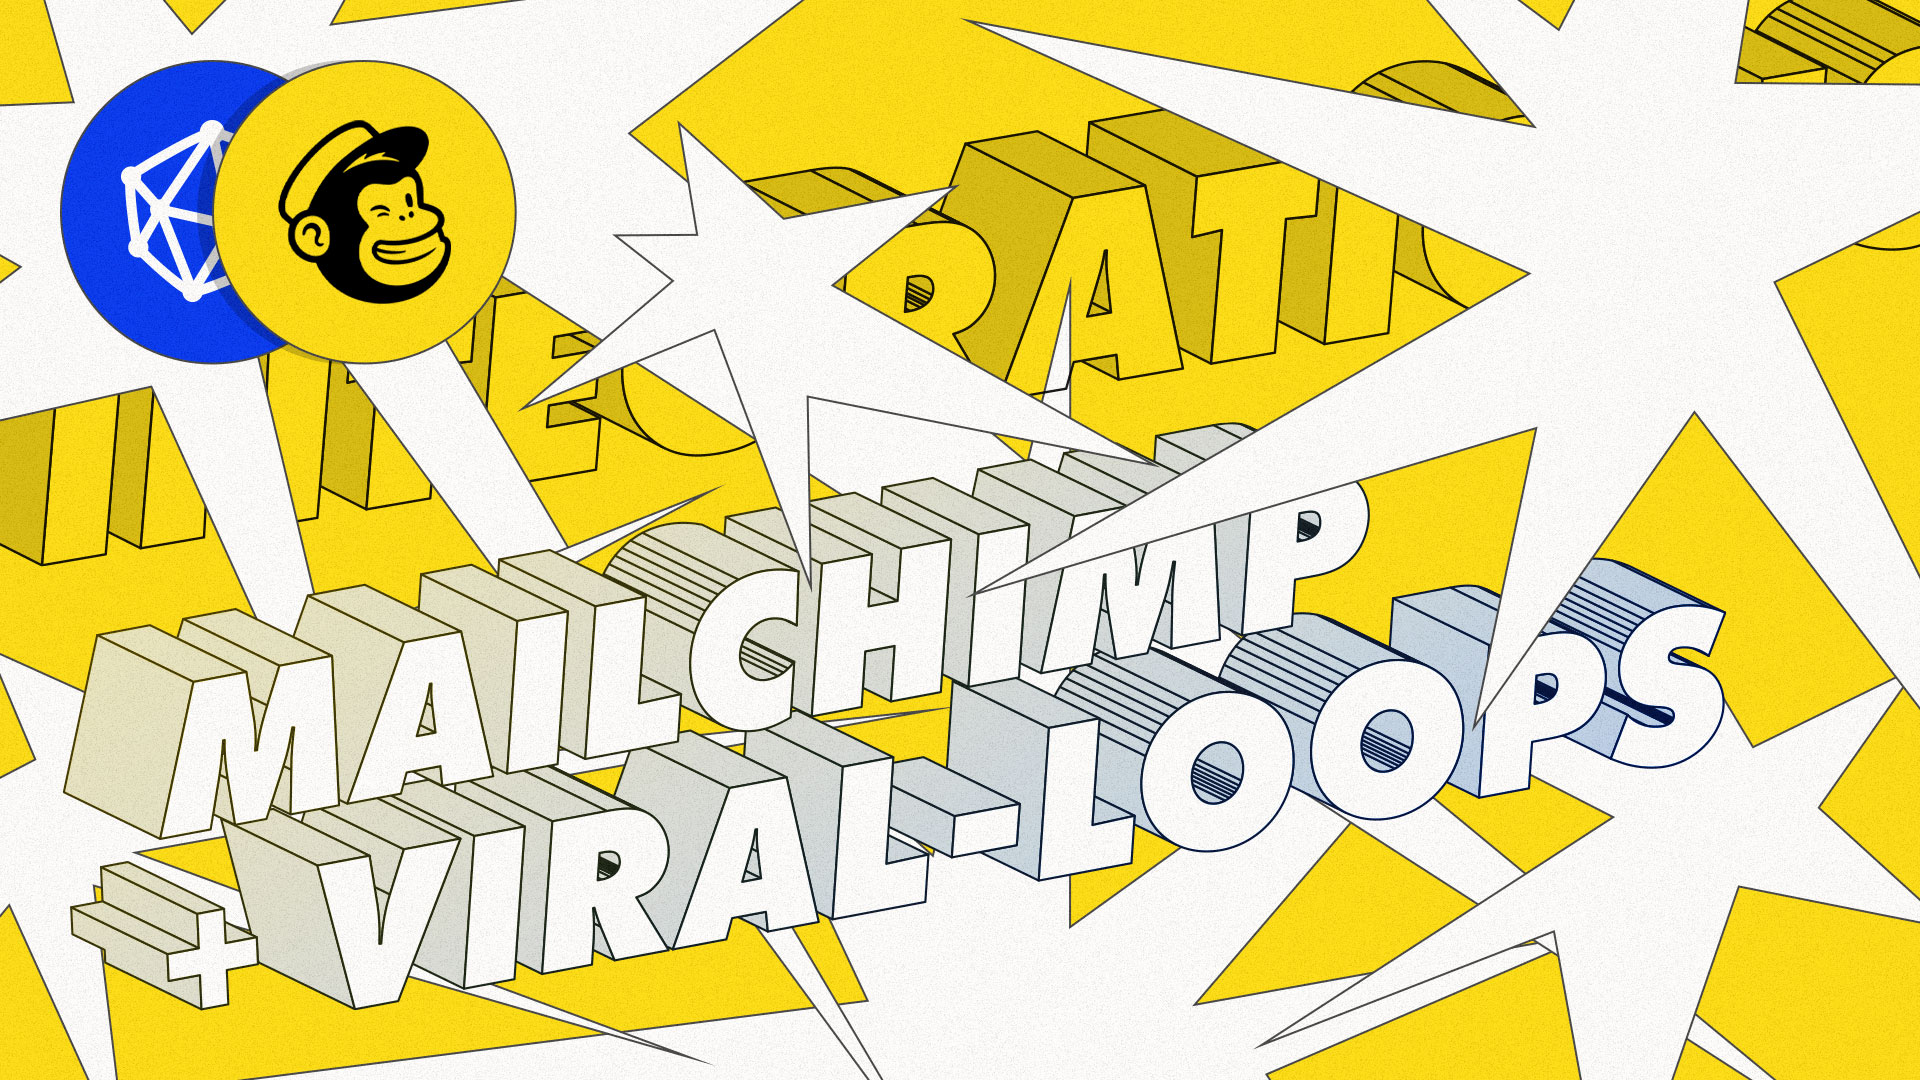 How to build a newsletter referral program with Mailchimp